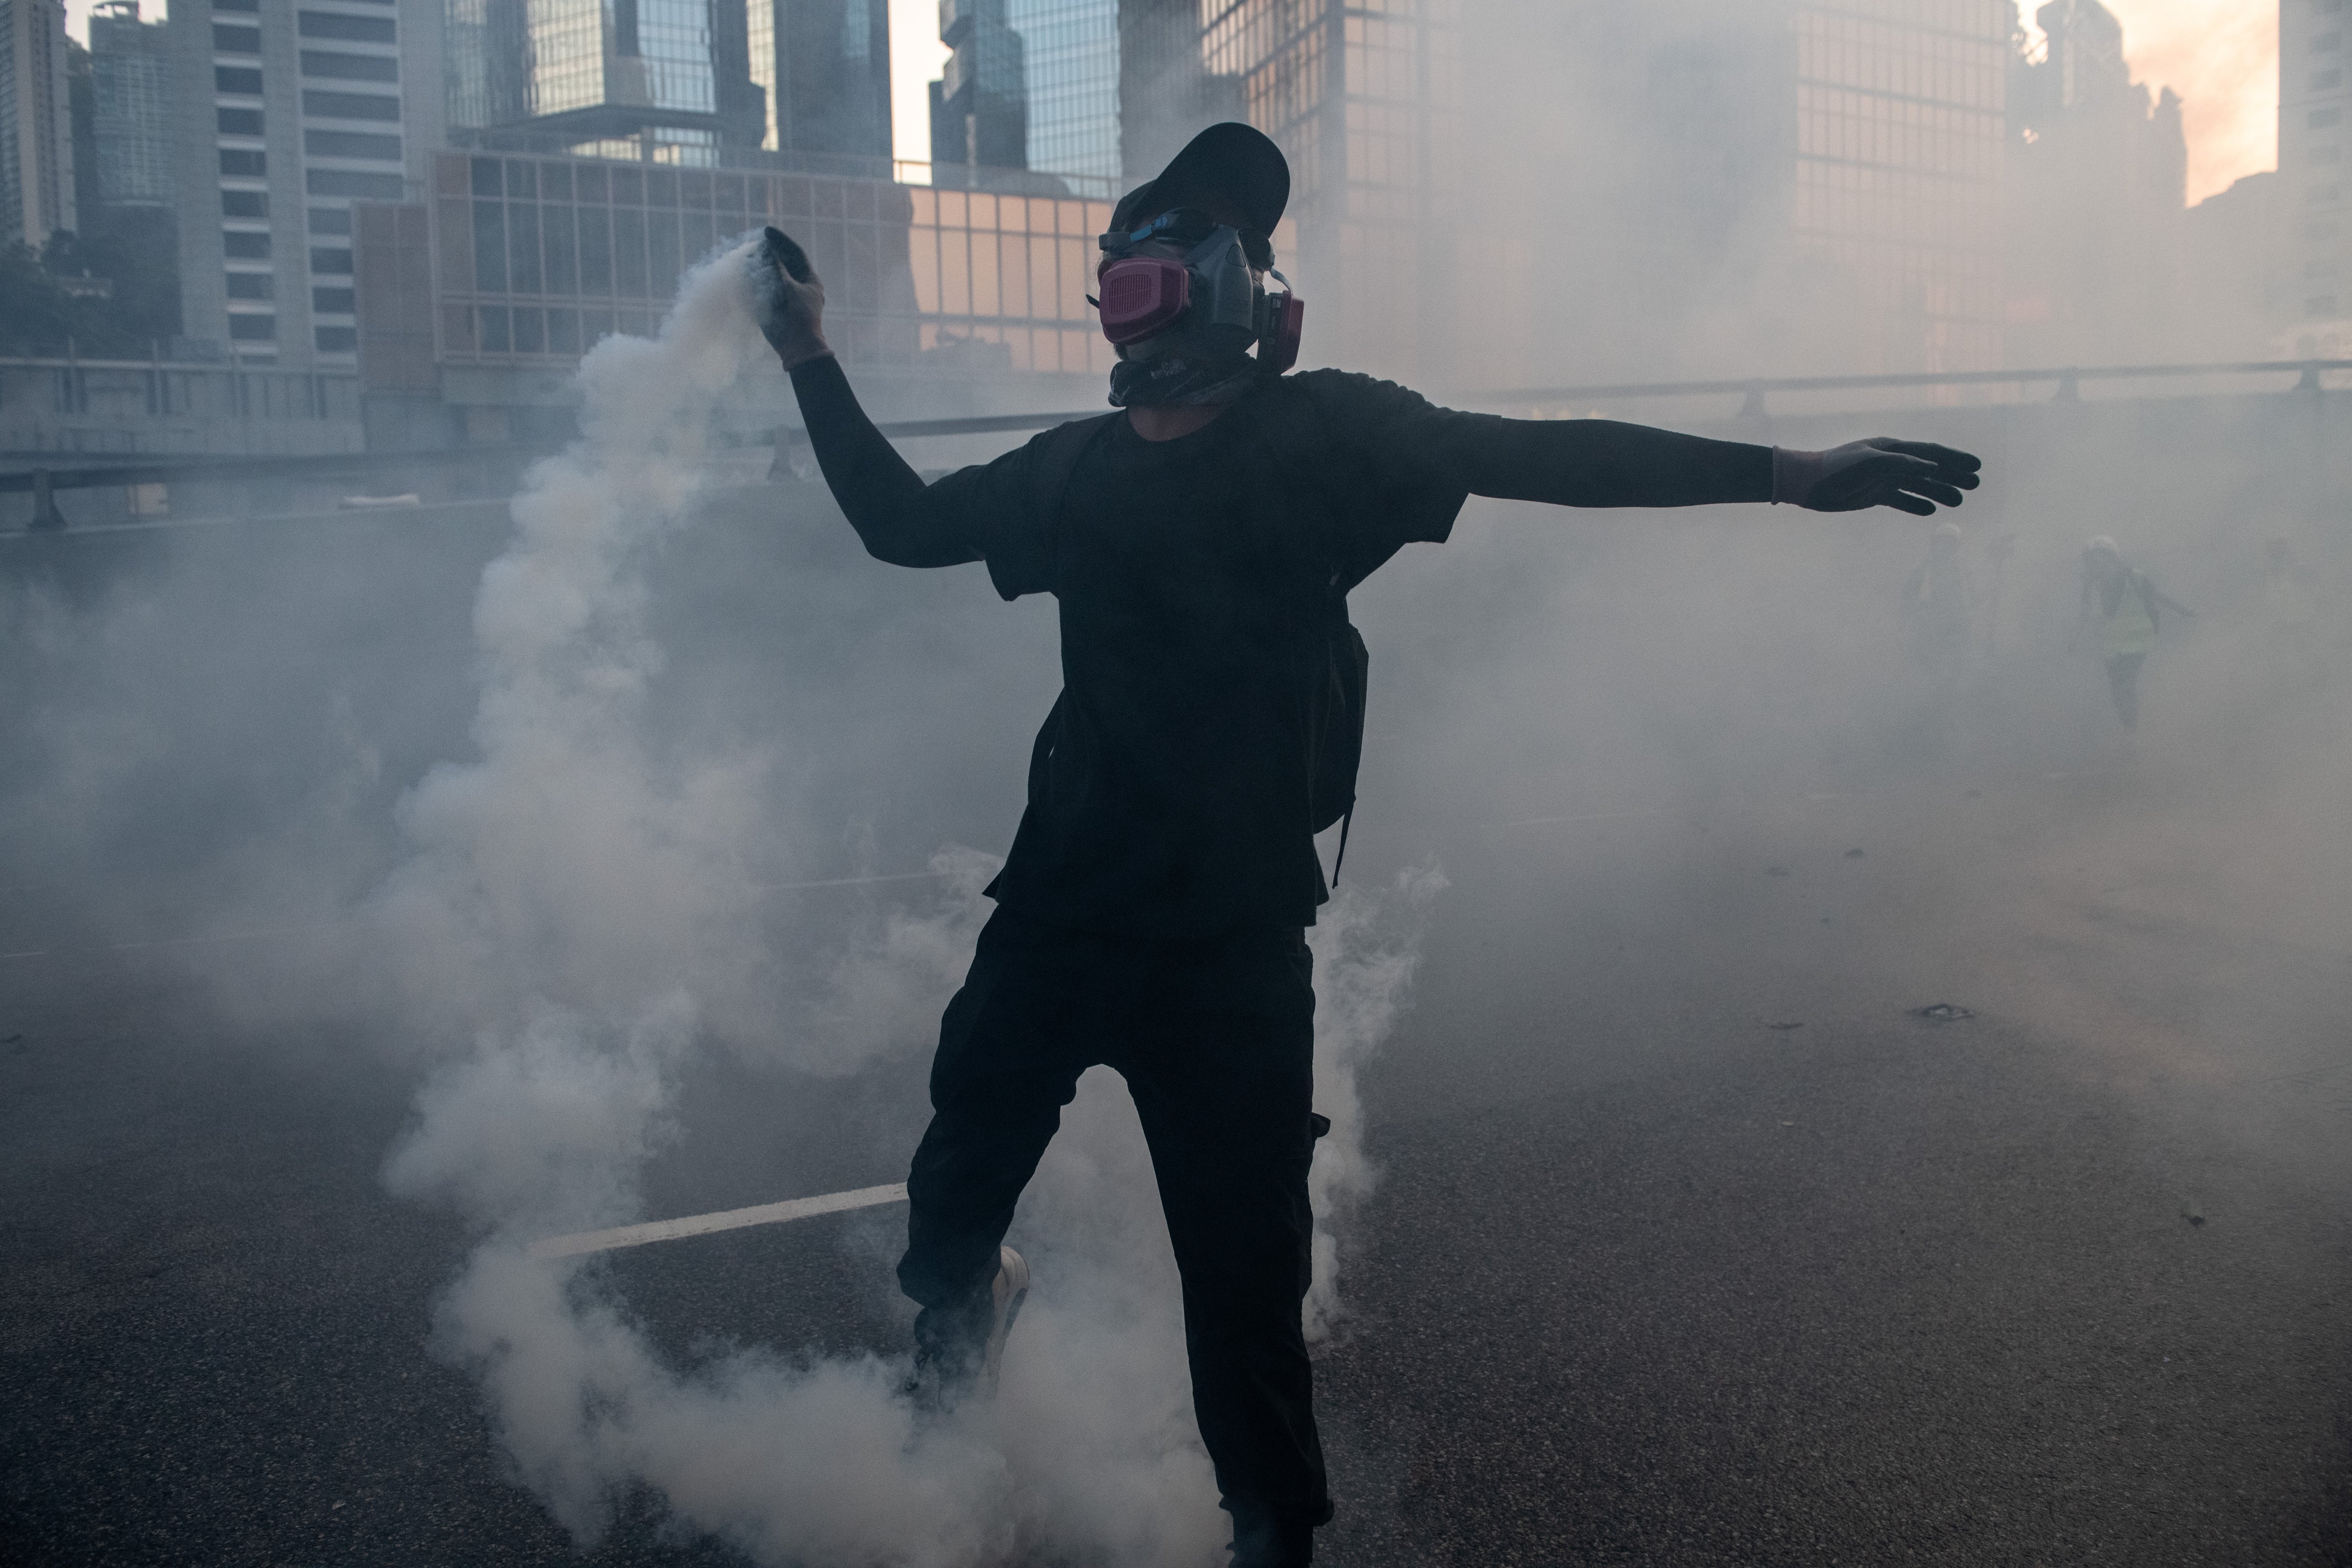 A pro-democracy protester throws a police teargas cartridge back at police officers in the Central Government Offices on September 15, 2019 in Hong Kong, China. (Carl Court—Getty Images)